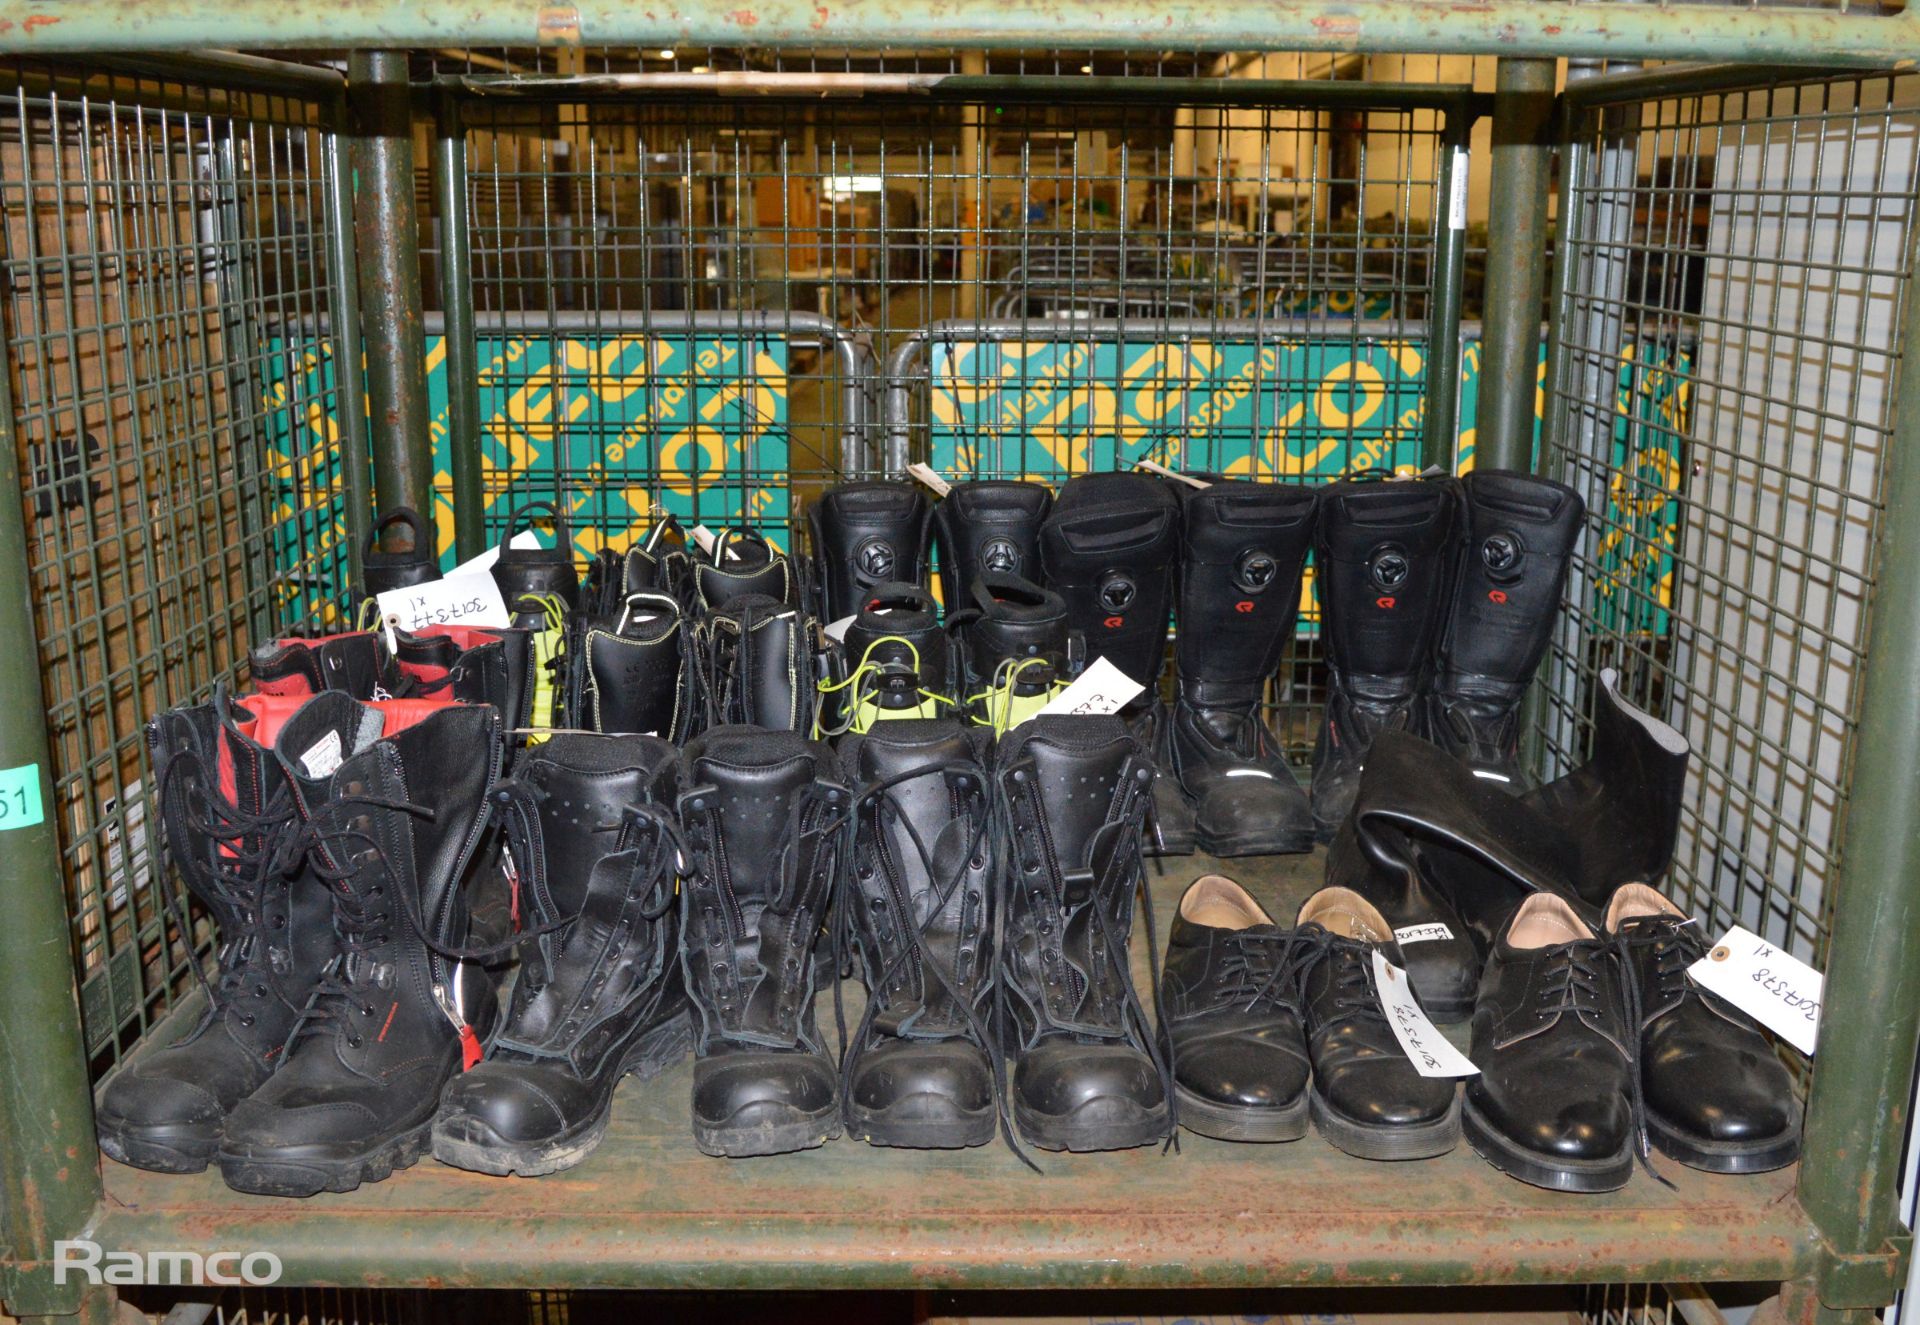 11 pairs of Protective boots - various styles / makes / sizes, Black shoes - various sizes, Wellies